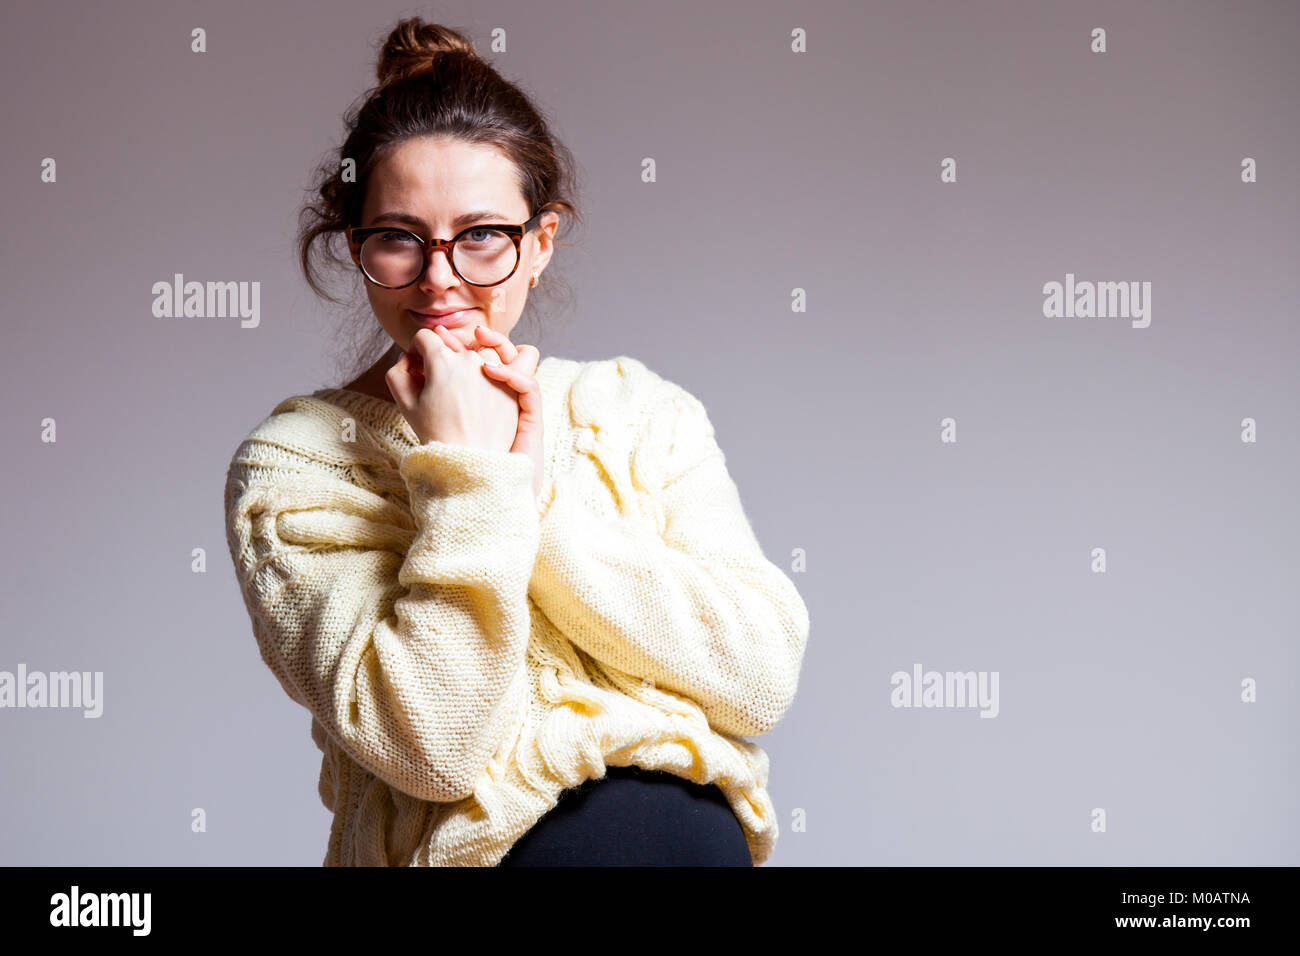 Portrait of a young dark-haired beautiful woman in her late pregnancy with glasses and a knitted milk-colored sweater on a white isolated background Stock Photo